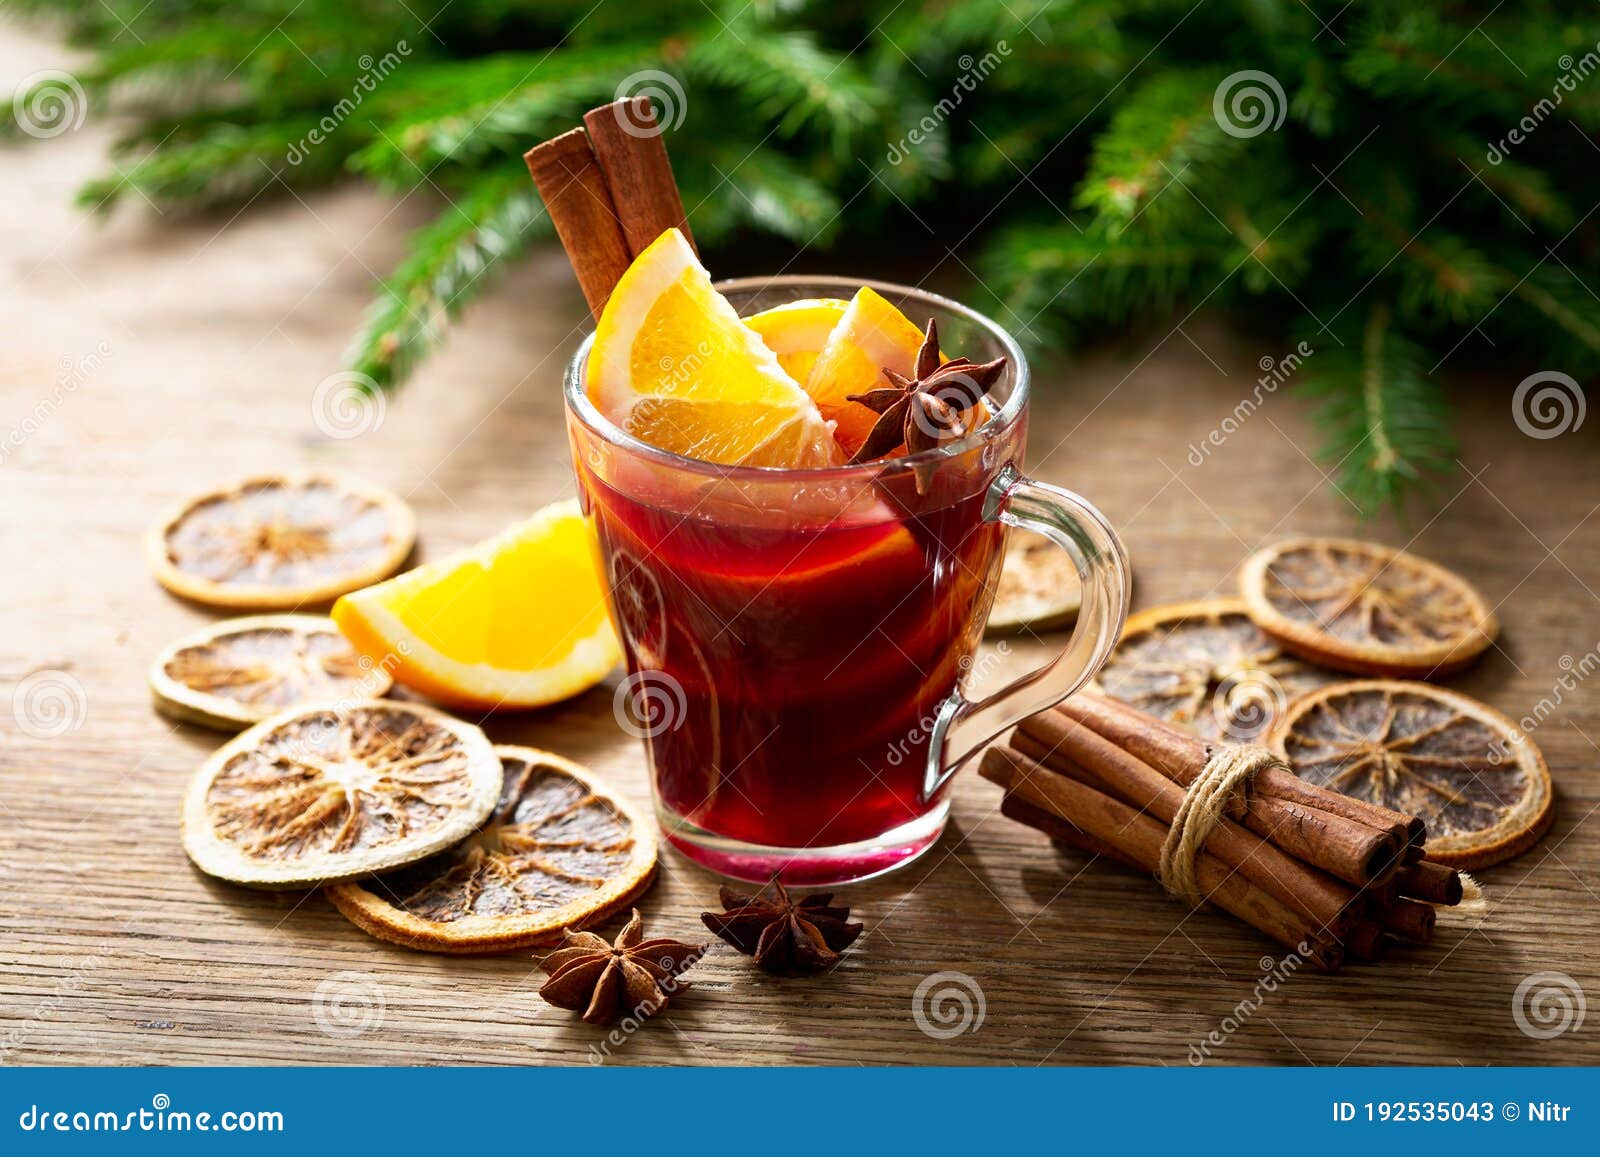 christmas drink. glass of hot mulled wine with oranges, anise and cinnamon